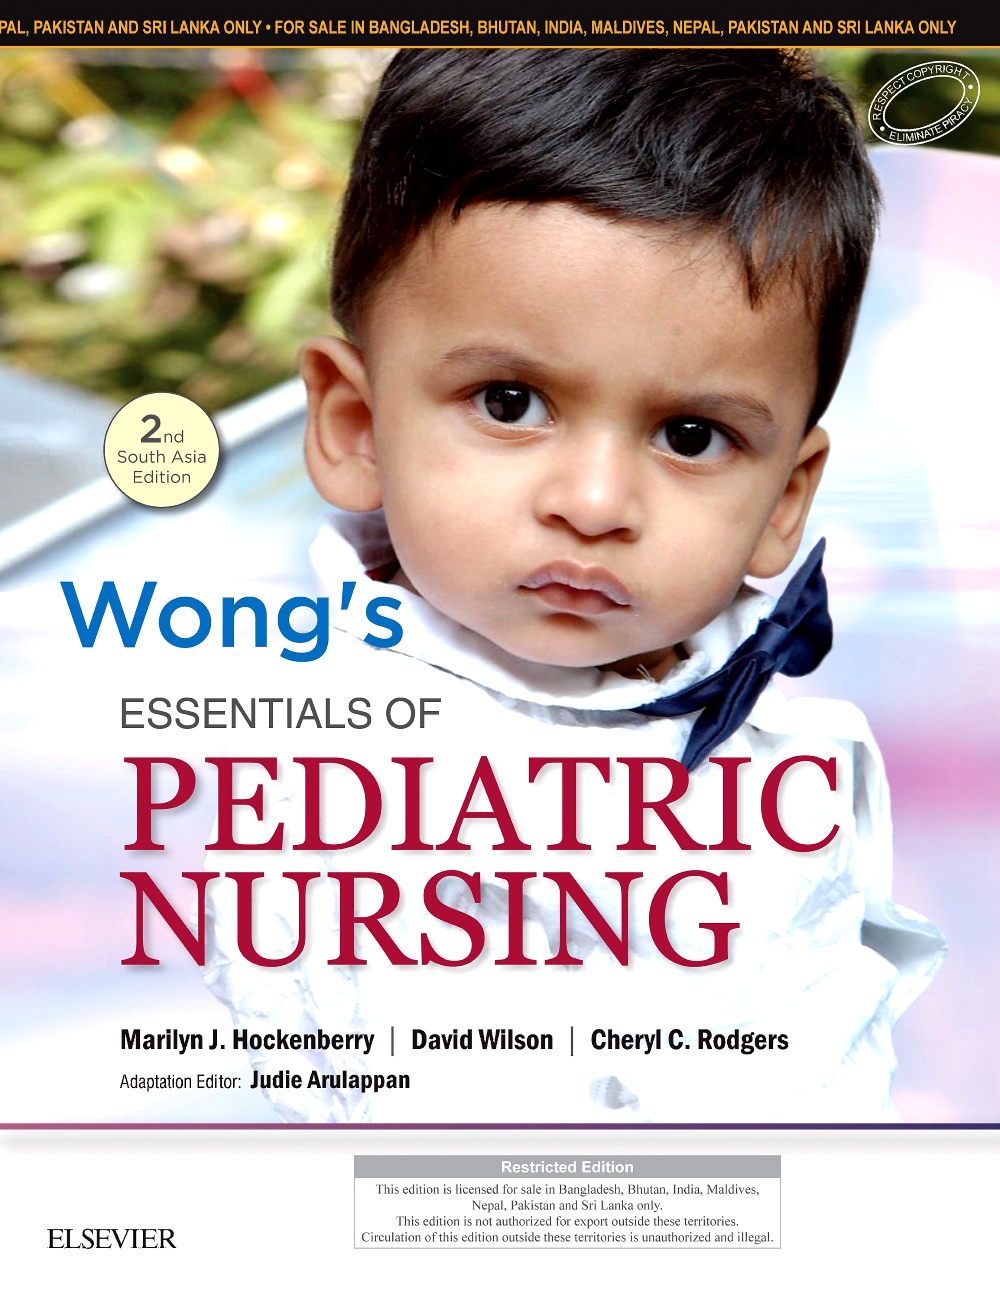 Wong'S Essentials Of Pediatric Nursing: Second South Asia Edition (Old Eiditon)